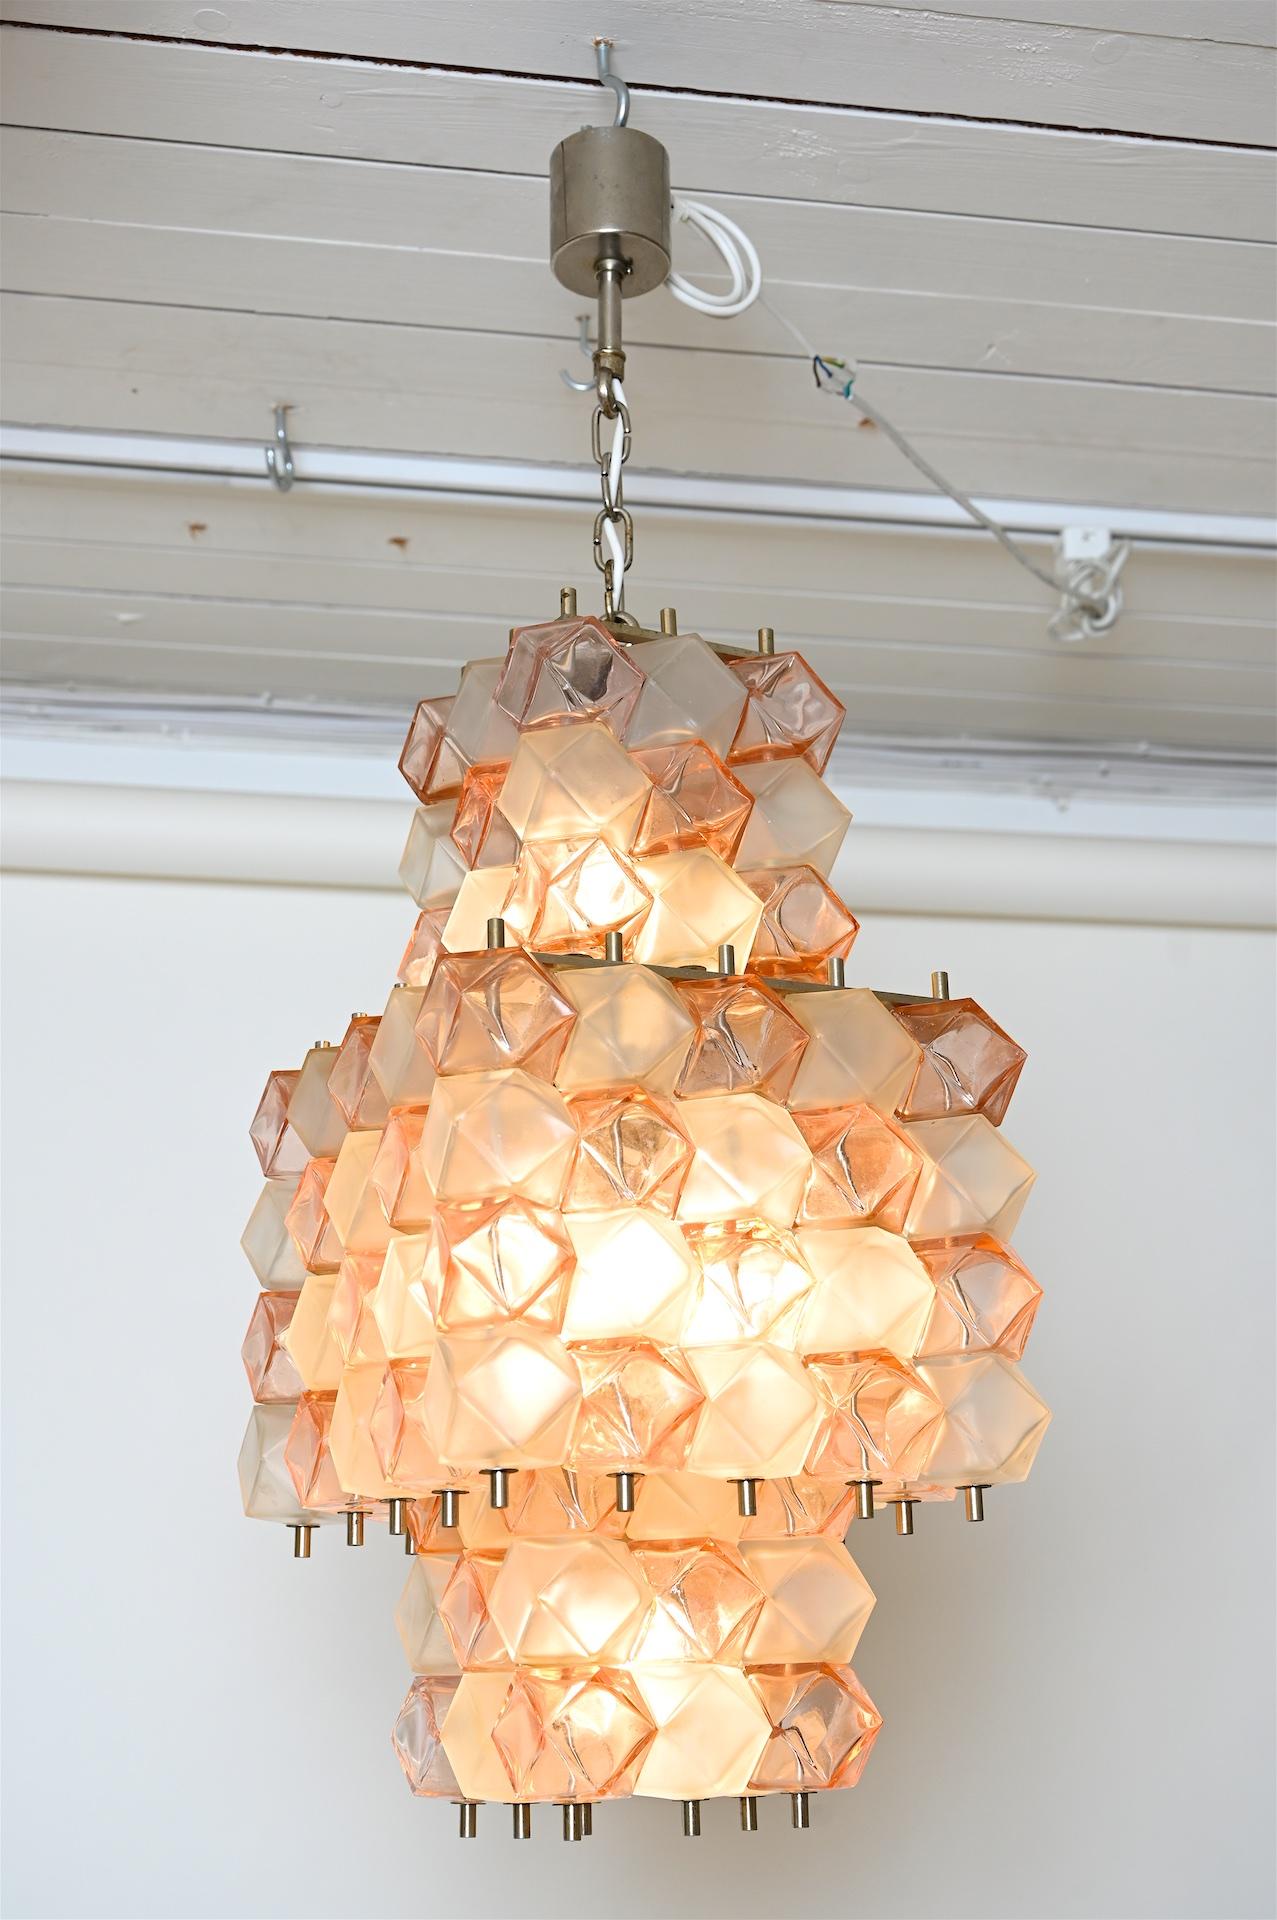 Similar to the Venini Poliedri chandeliers, Italy, circa 1950s

Lovely chandelier with pale pink and white faceted glass 

Measures: 95cm drop. (can be 20cm higher without chain)... and lengthened if needed.

 